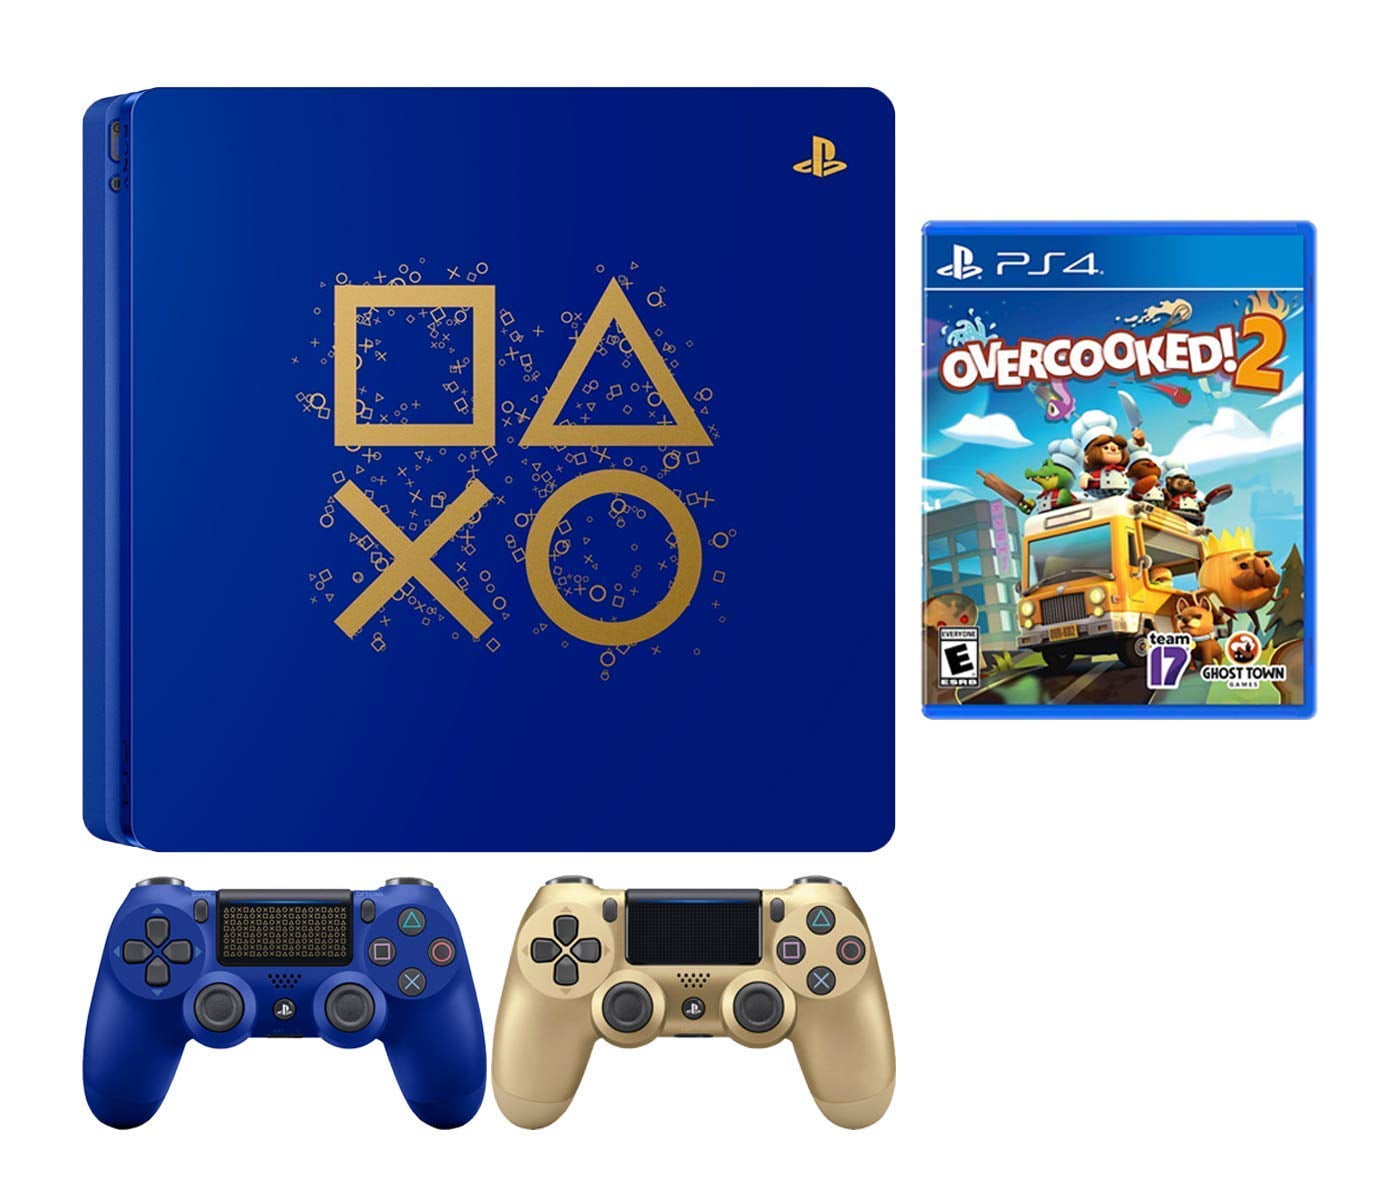 Playstation days. Ps4 Limited Edition Days of Play. Overcooked2 ps4. Play no limits PLAYSTATION.